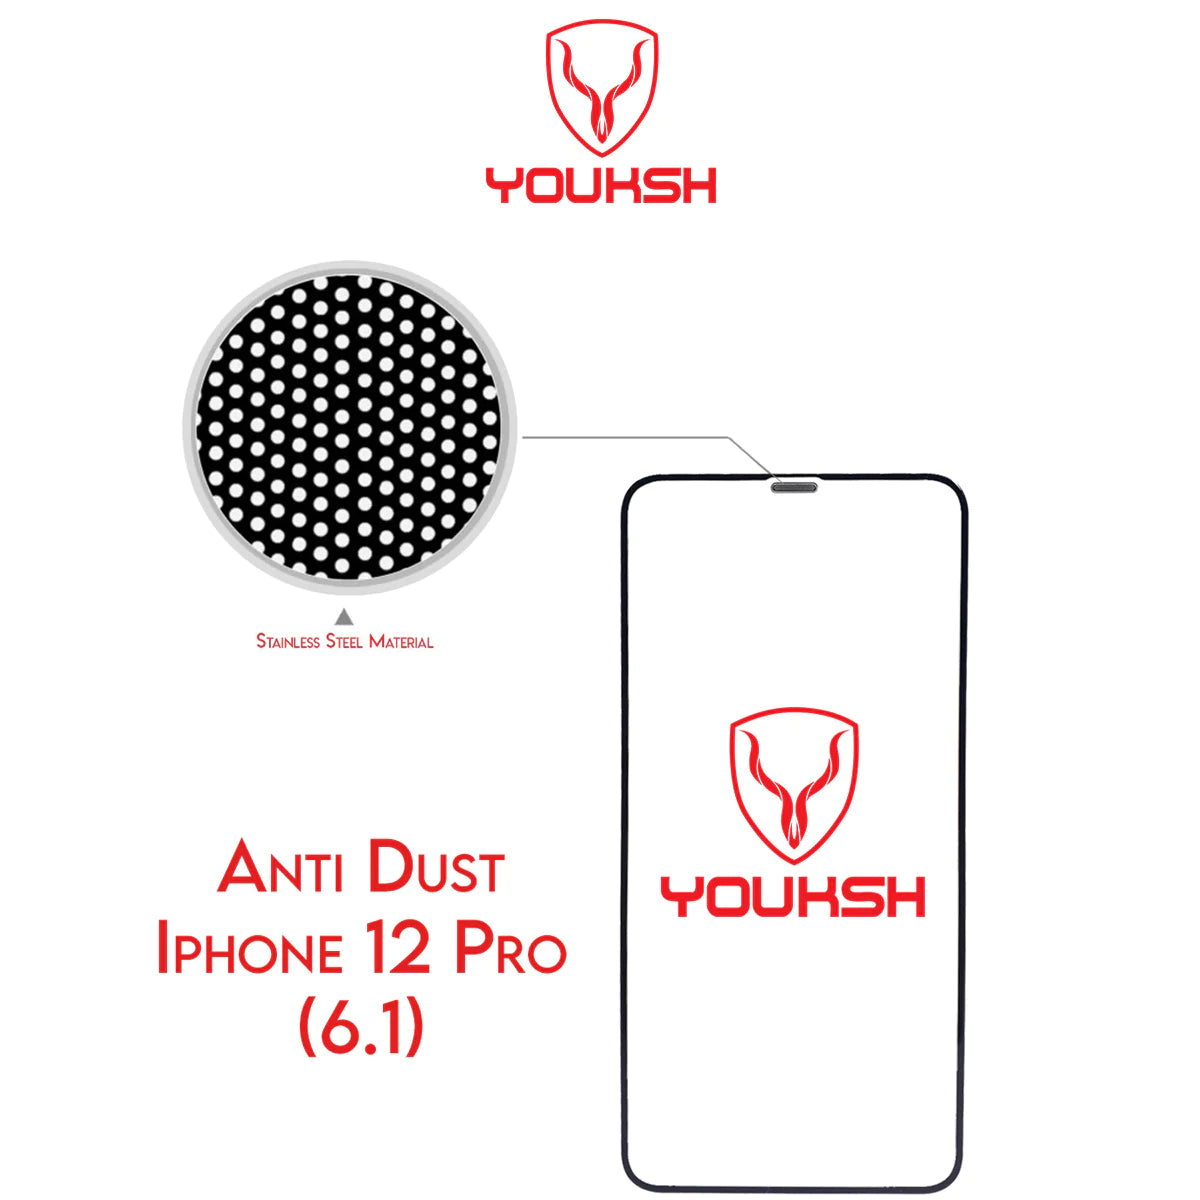 YOUKSH Apple iPhone 12/12 Pro Anti Static Glass Protector With YOUKSH Installation Kit